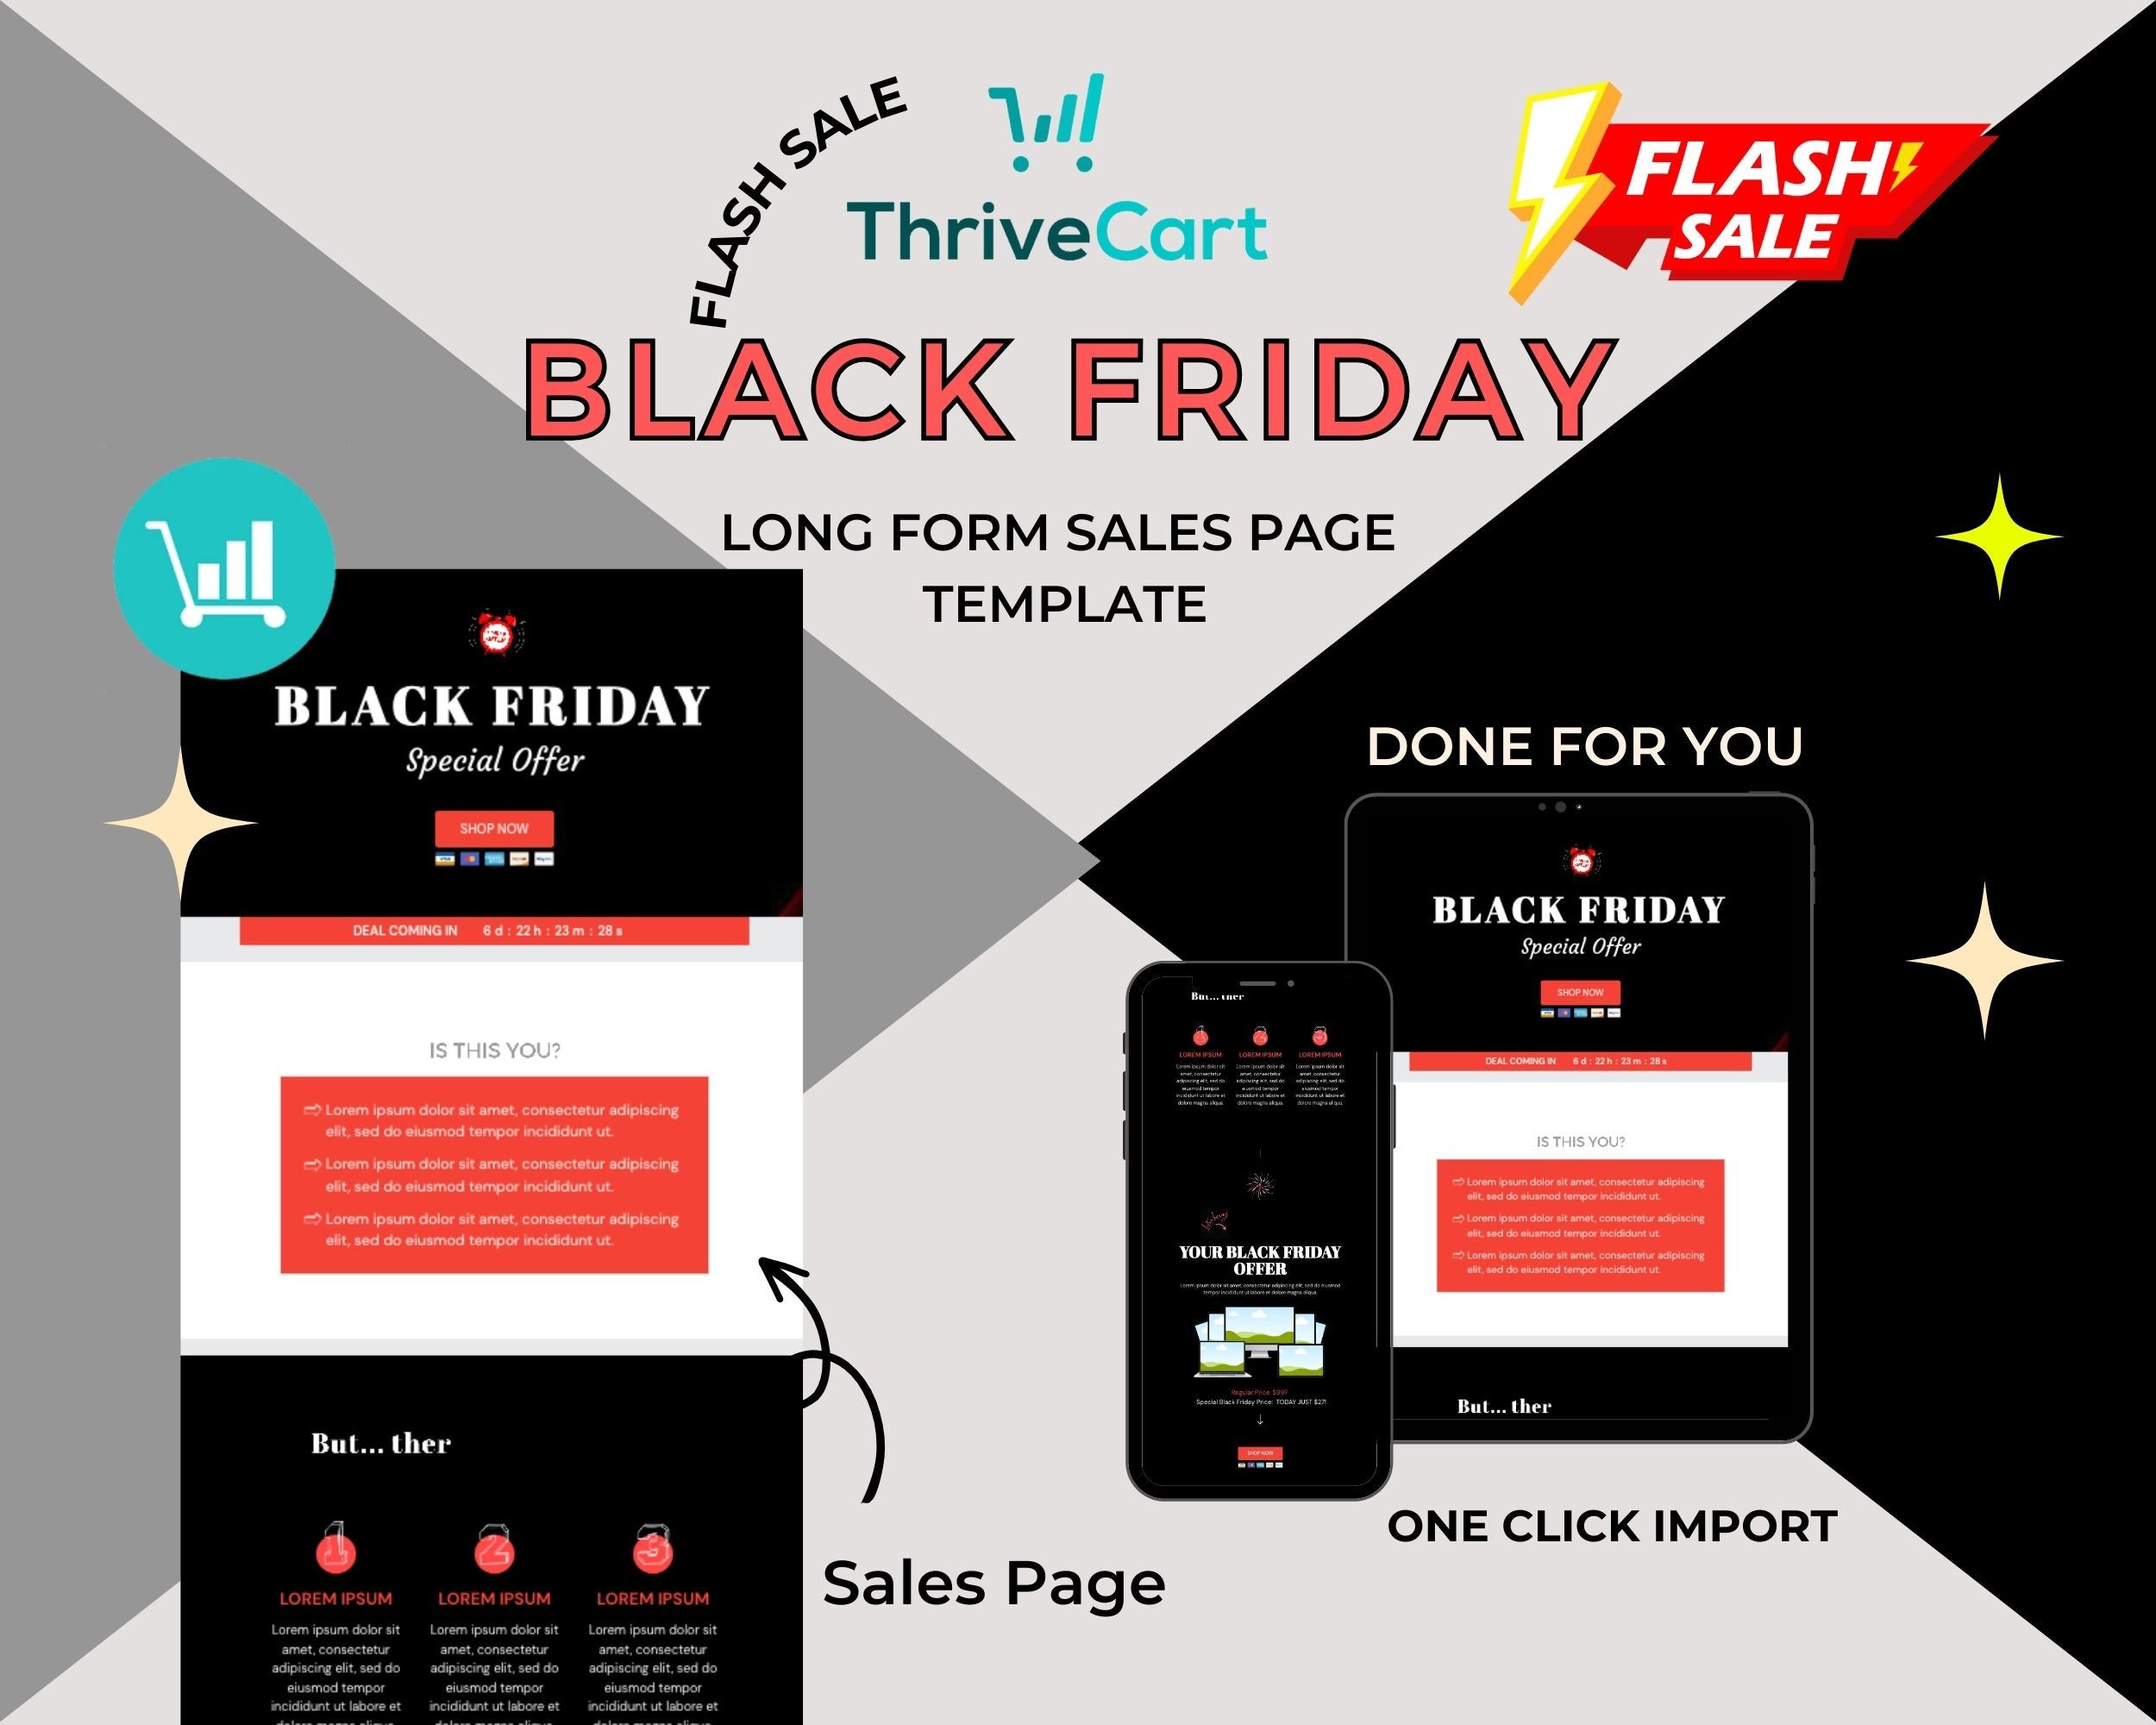 Animated Black Friday Sales Page Template in ThriveCart